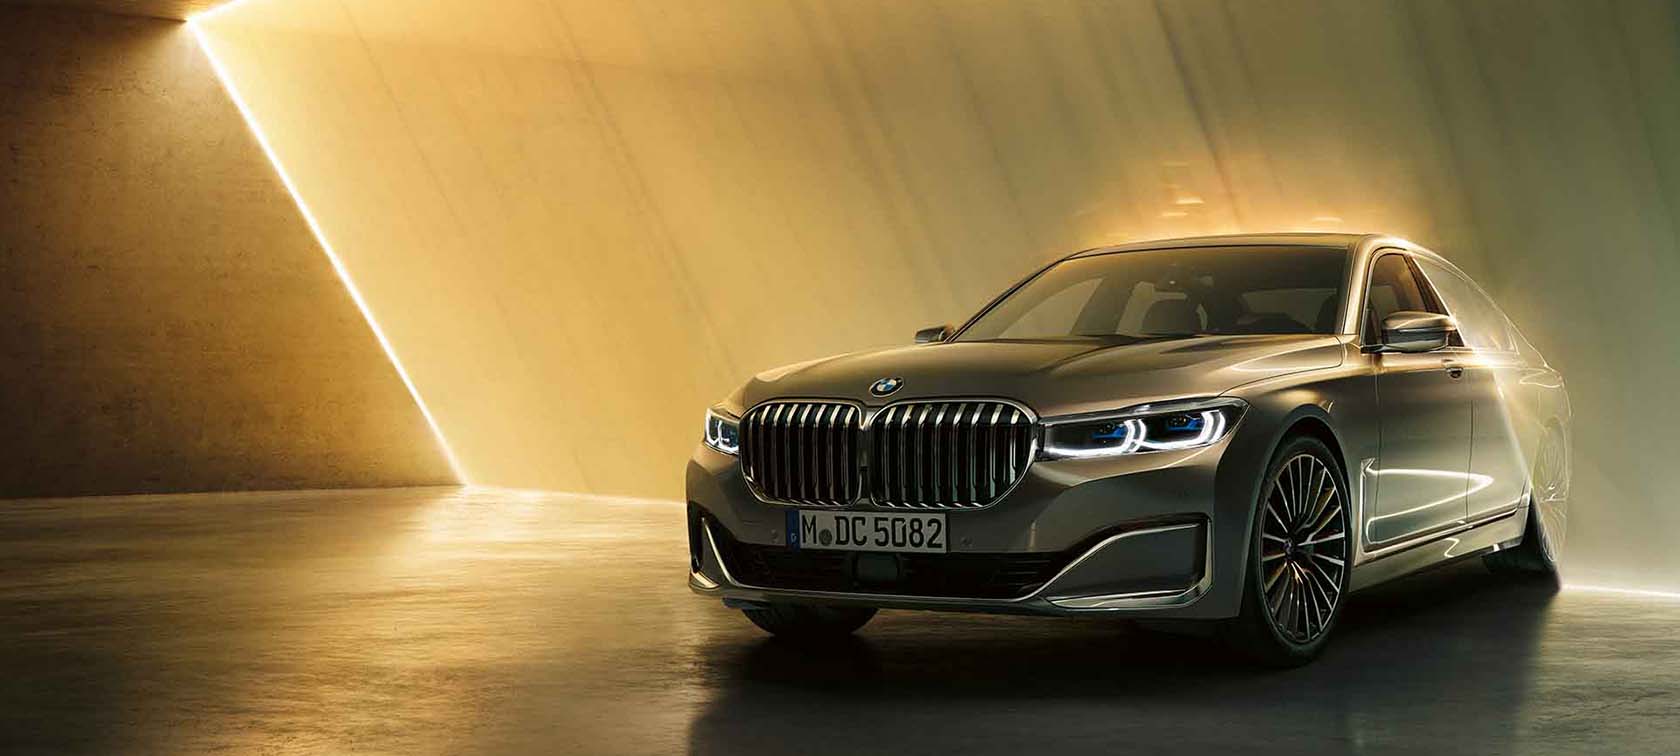 THE BMW 7 SERIES